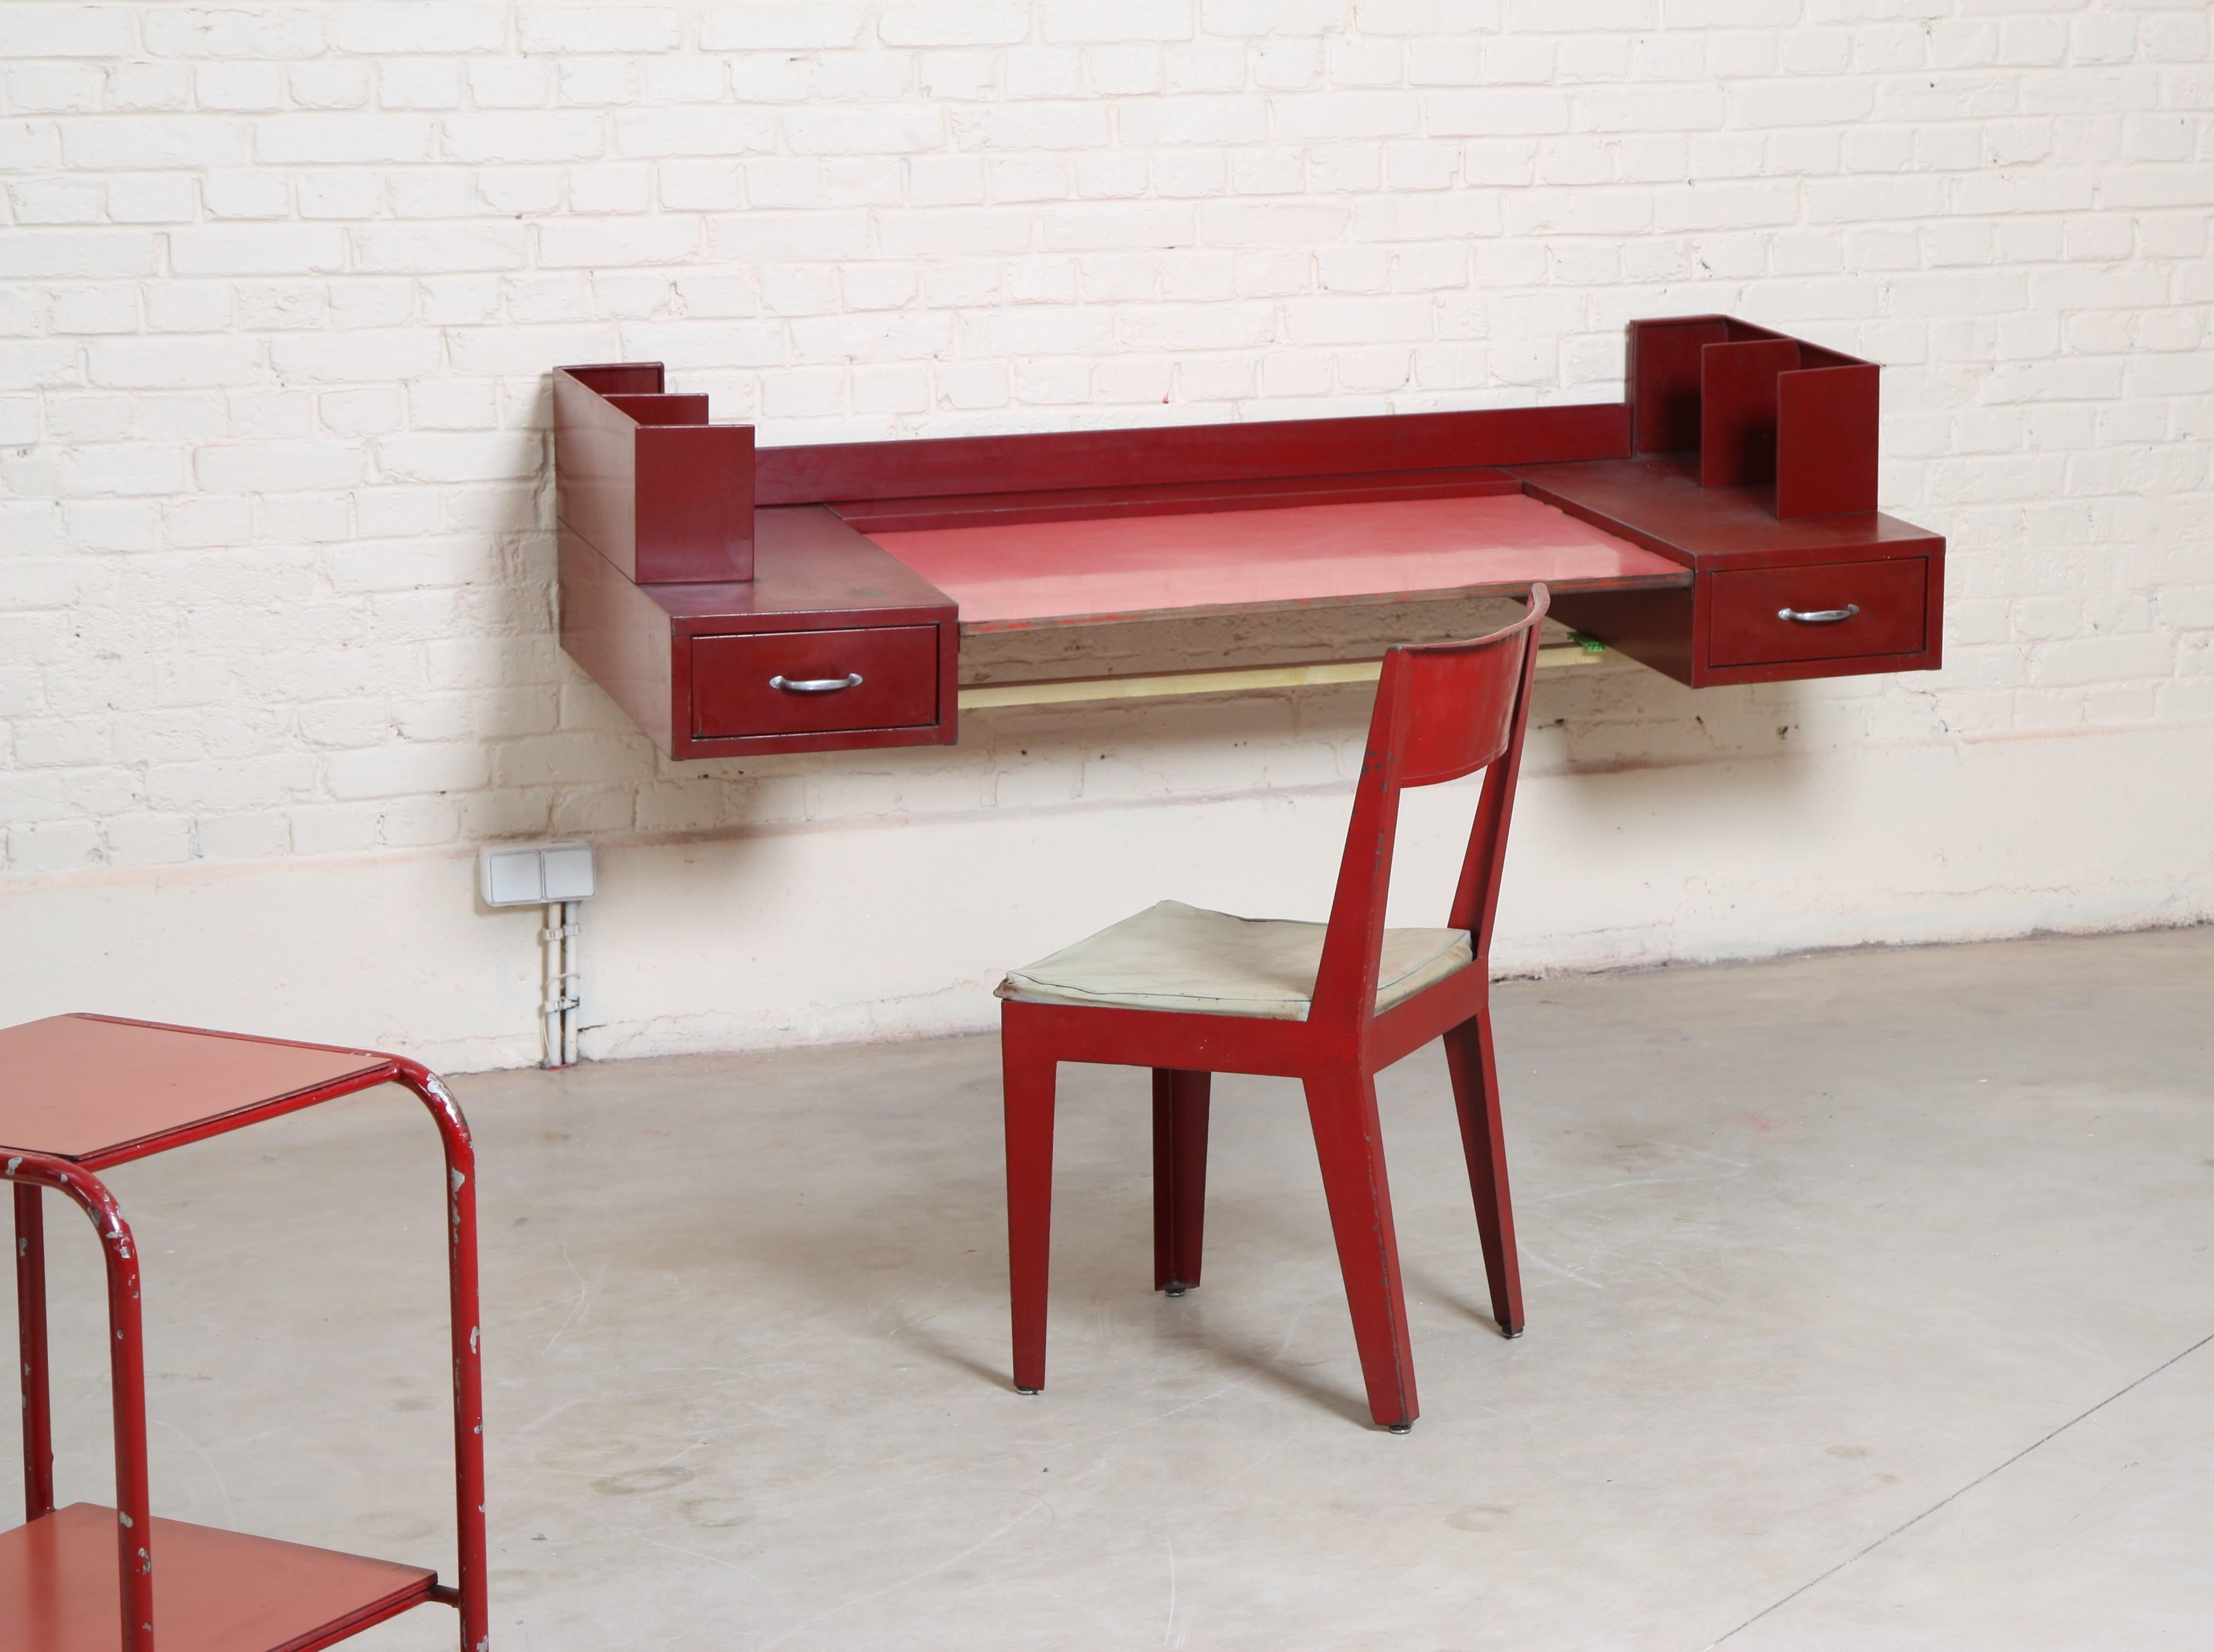 Set consisting of a office table and chair with angle structure. The whole being entirely lacquered in red-blood color.

Furniture designed in 1934-35 for the sanatorium of Guébriant and sponsored by the French Army to the architects Abraham and